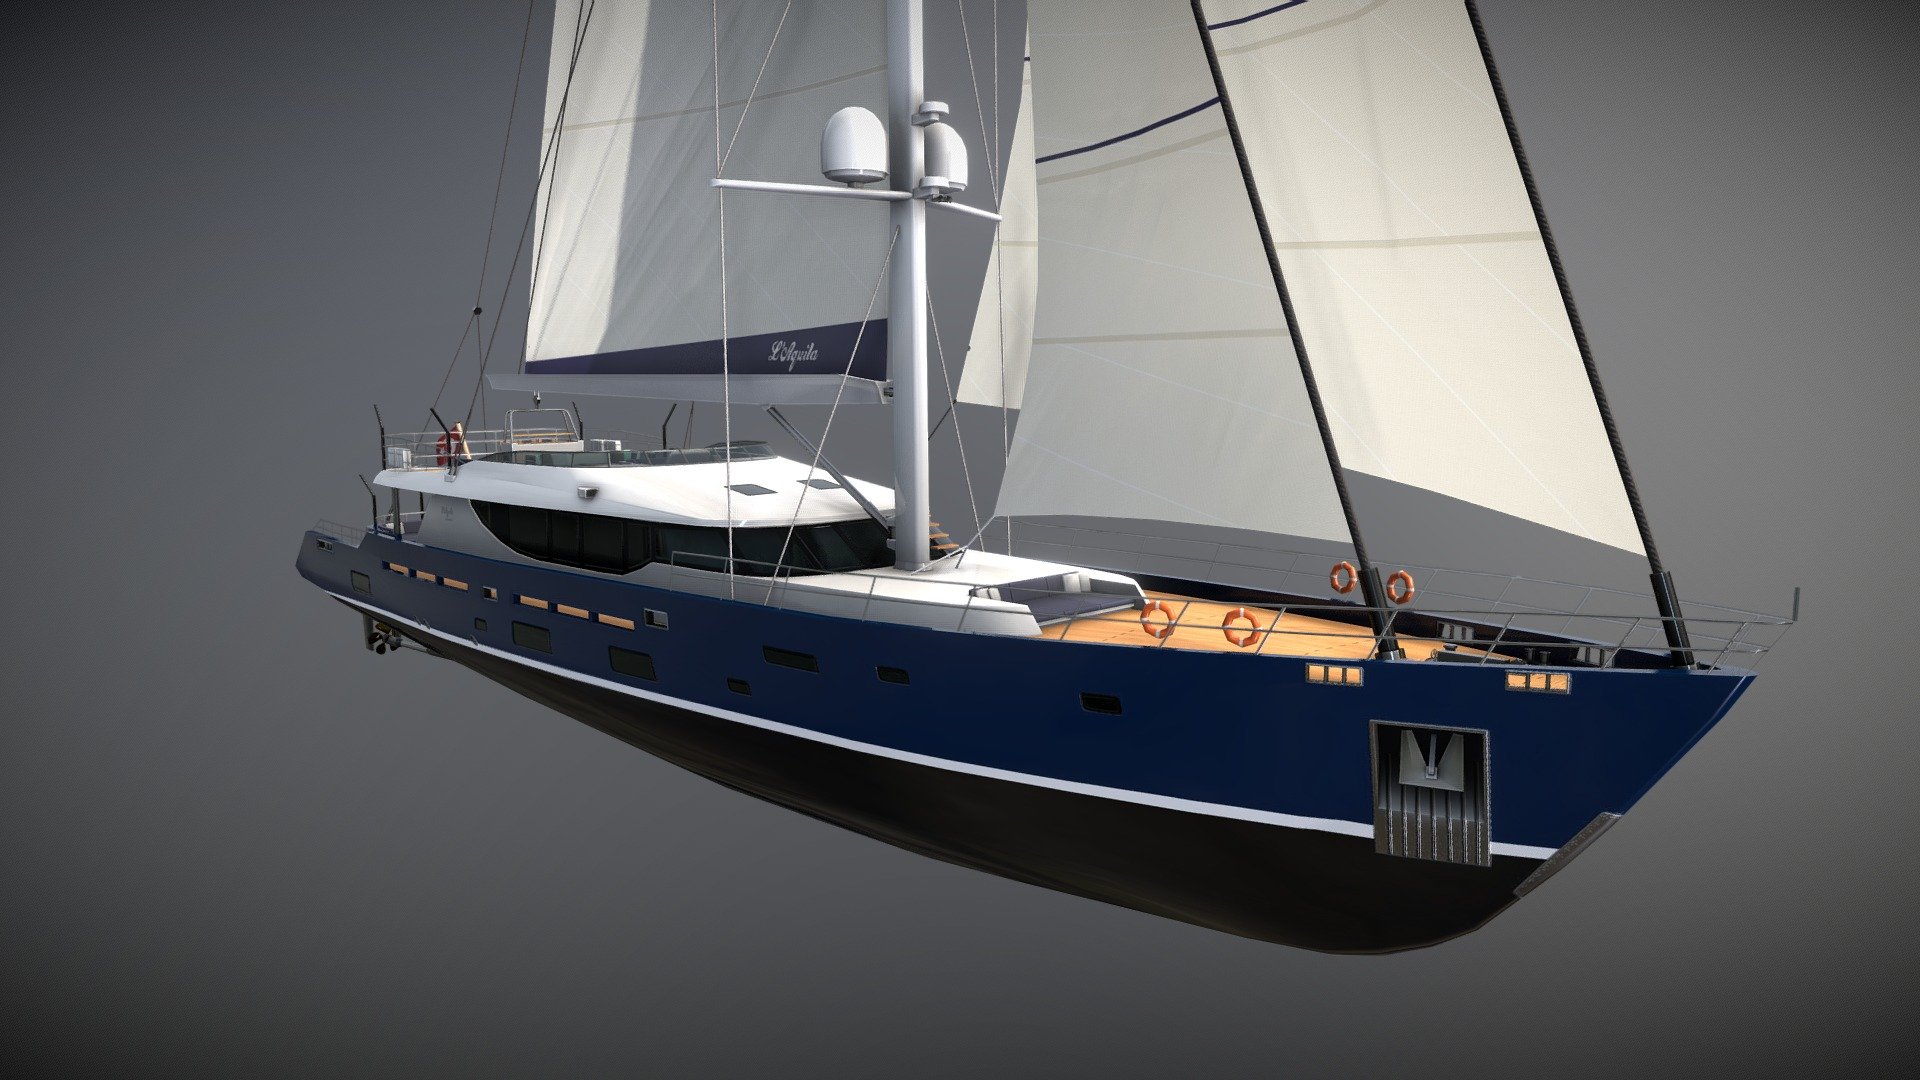 Made in Maya, Textured in Substance Painter - Sailing Yacht L'Aquila - 3D model by Gingerbread (@aerialmace) 3d model